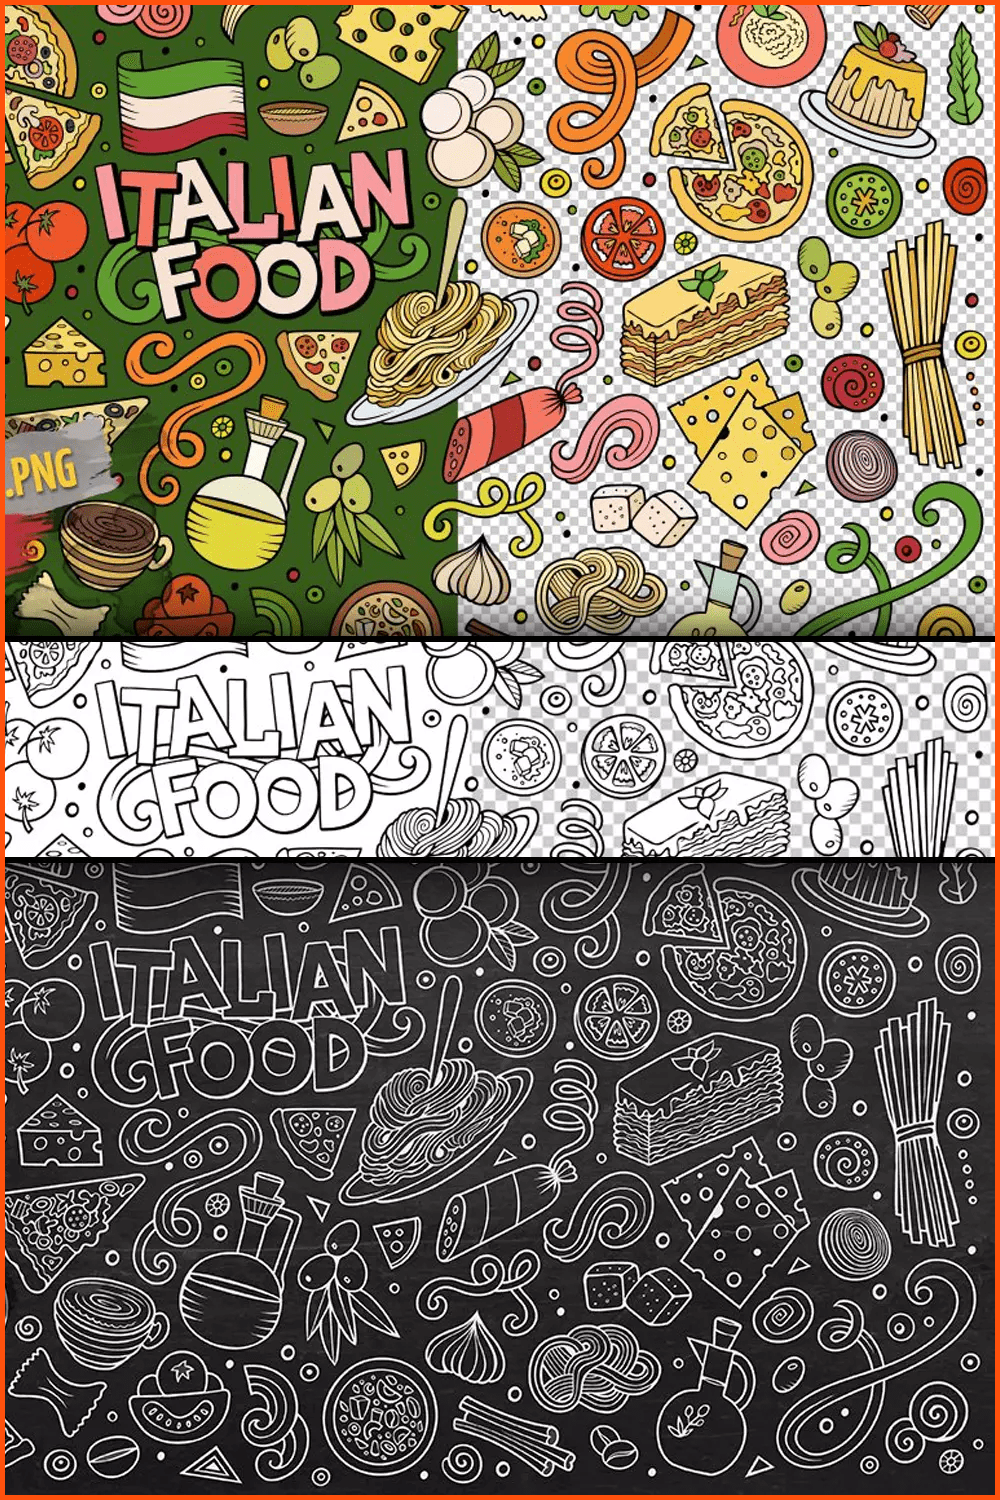 Cartoons of Italian food with cute doodle pizza.